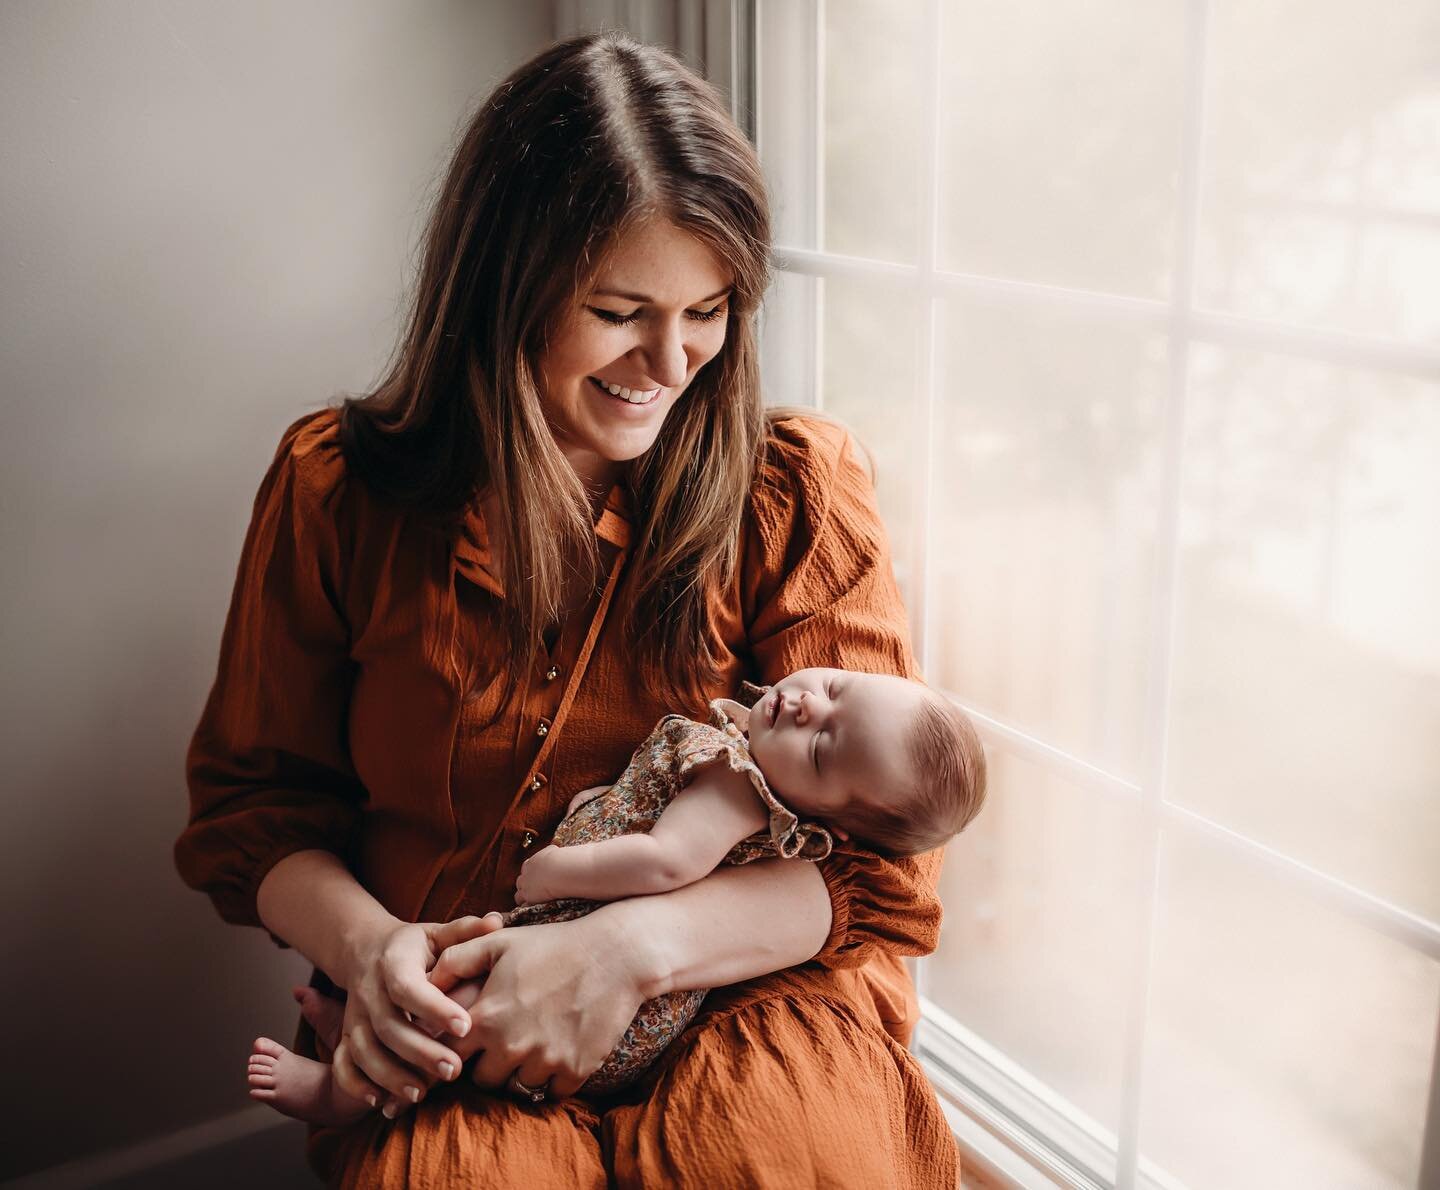 I&rsquo;ve had a month full of more newborn sessions than ever before!

I love being able to document these first days at home so you&rsquo;ll always be able to remember them.

The early days are fleeting, but luckily the photos, and more importantly